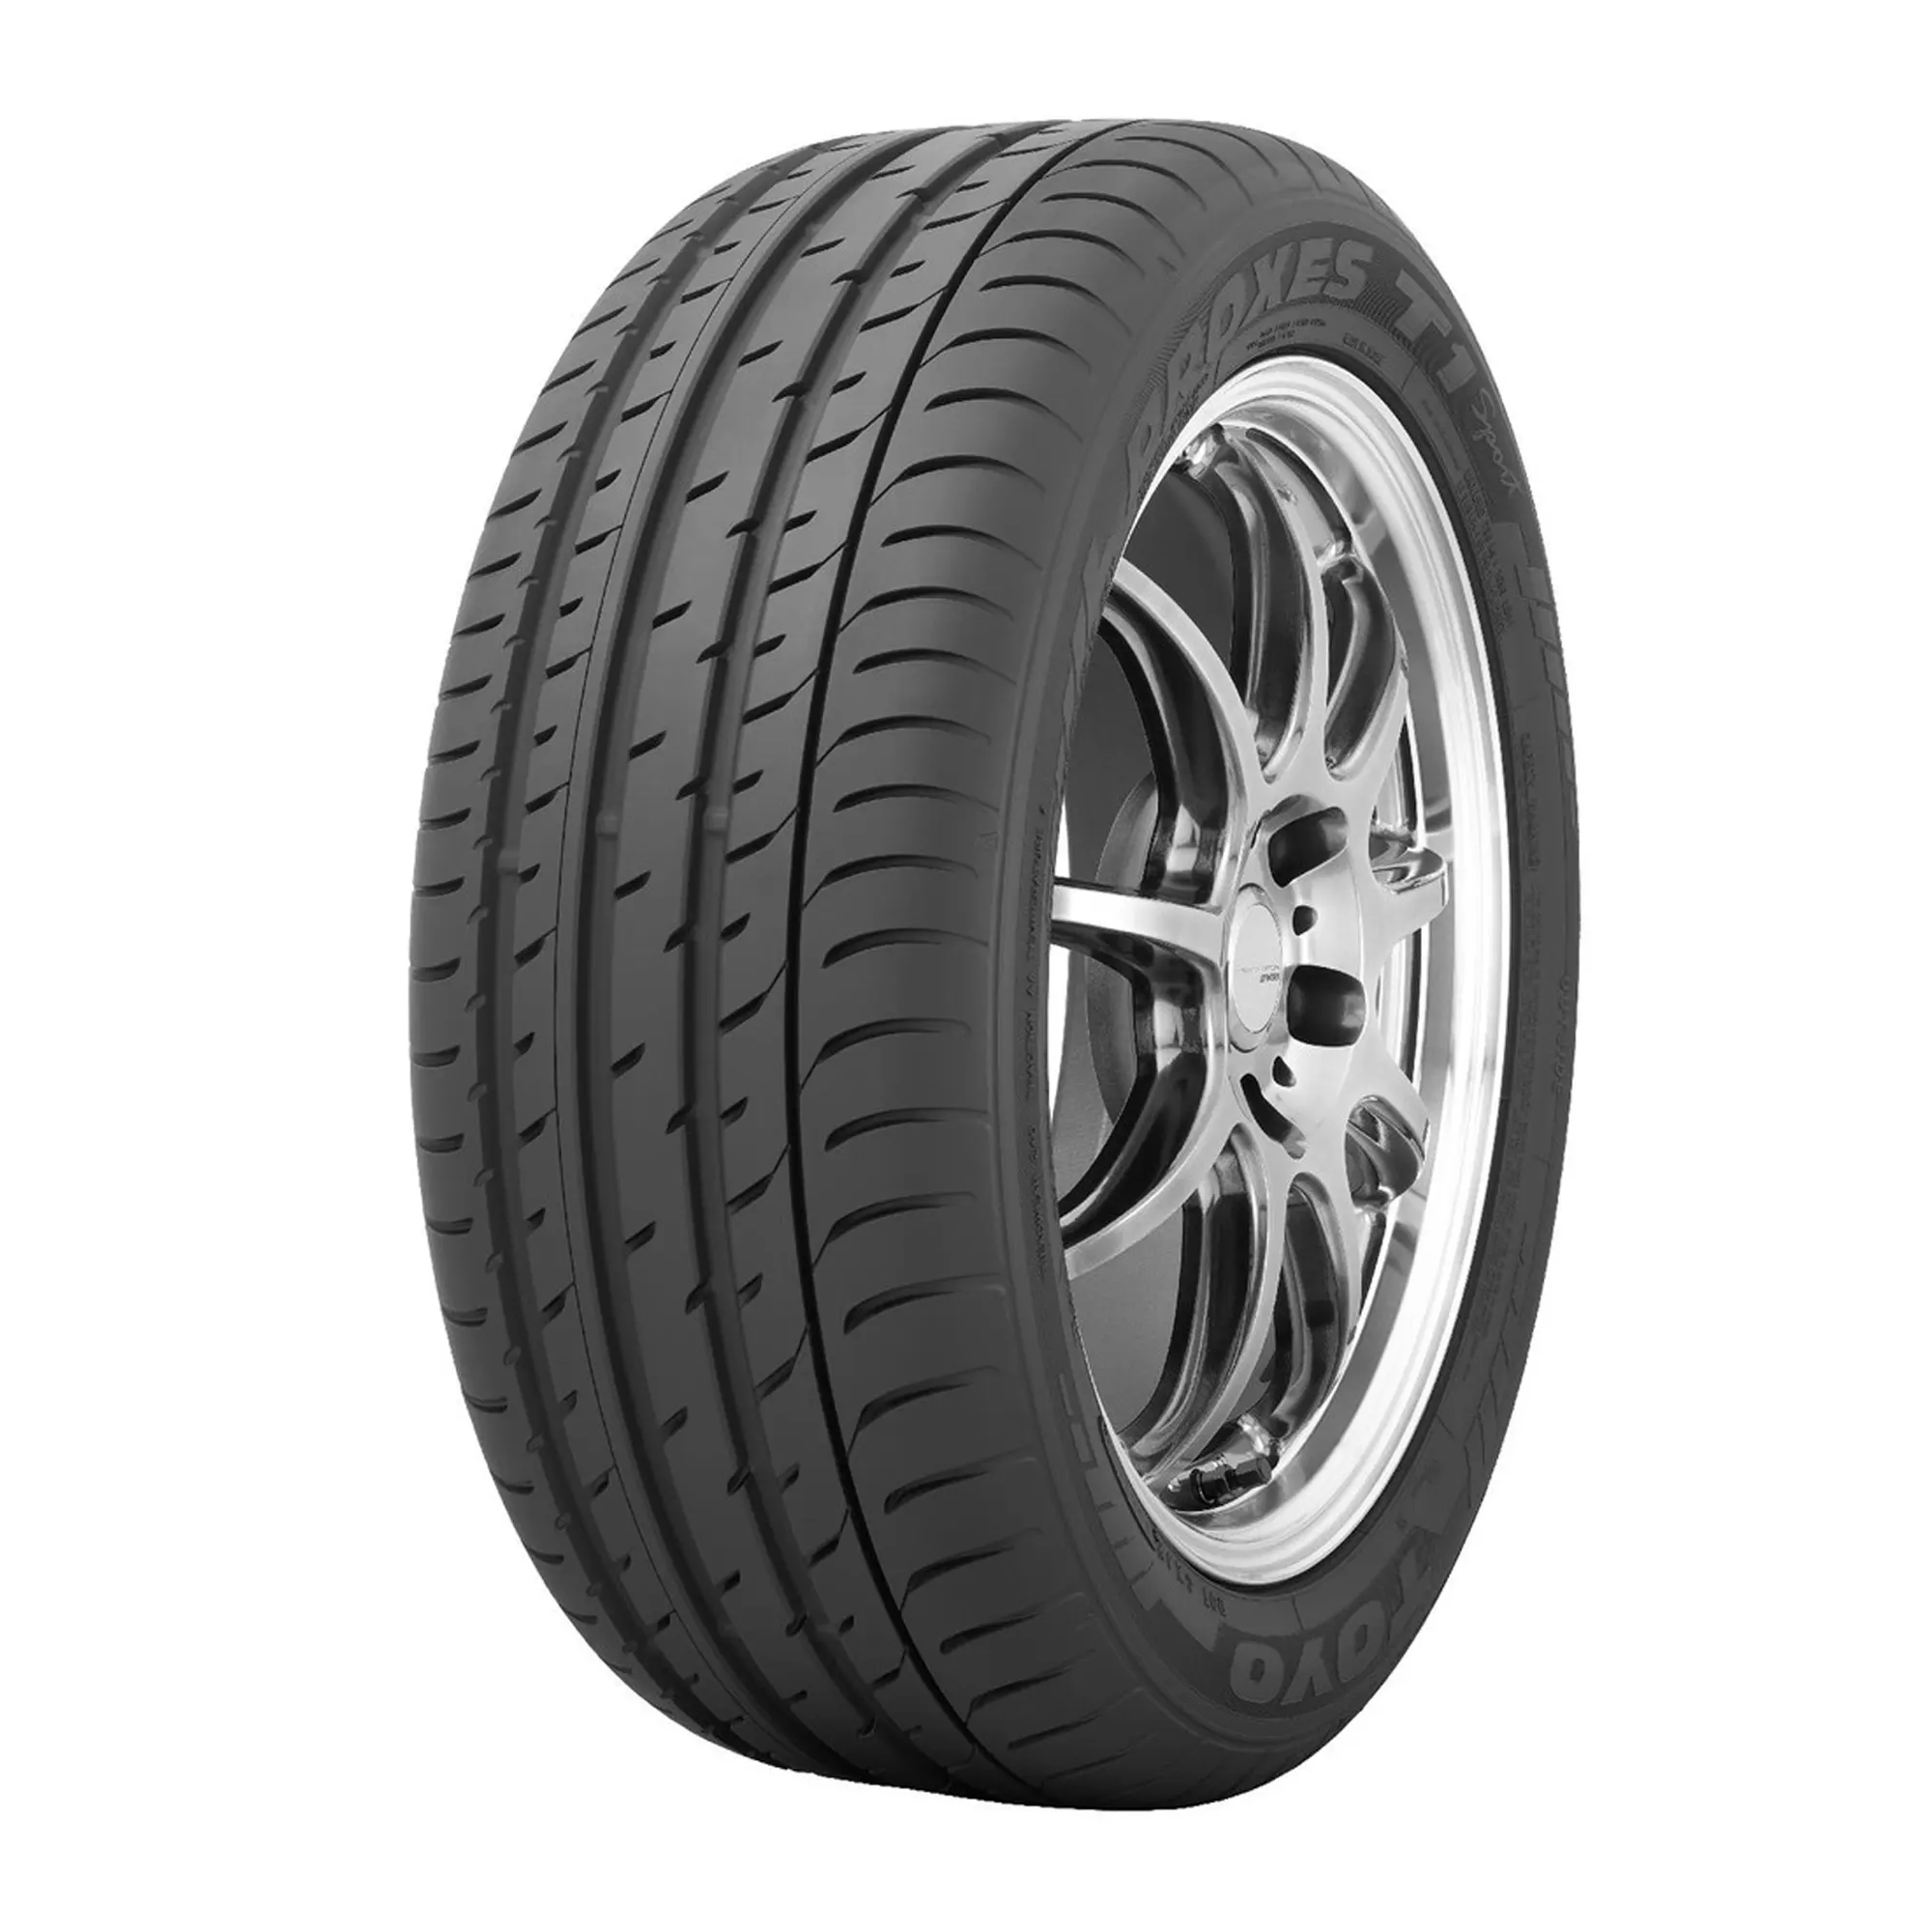 Шина 275/35R20 102Y PROXES T1 SPORT